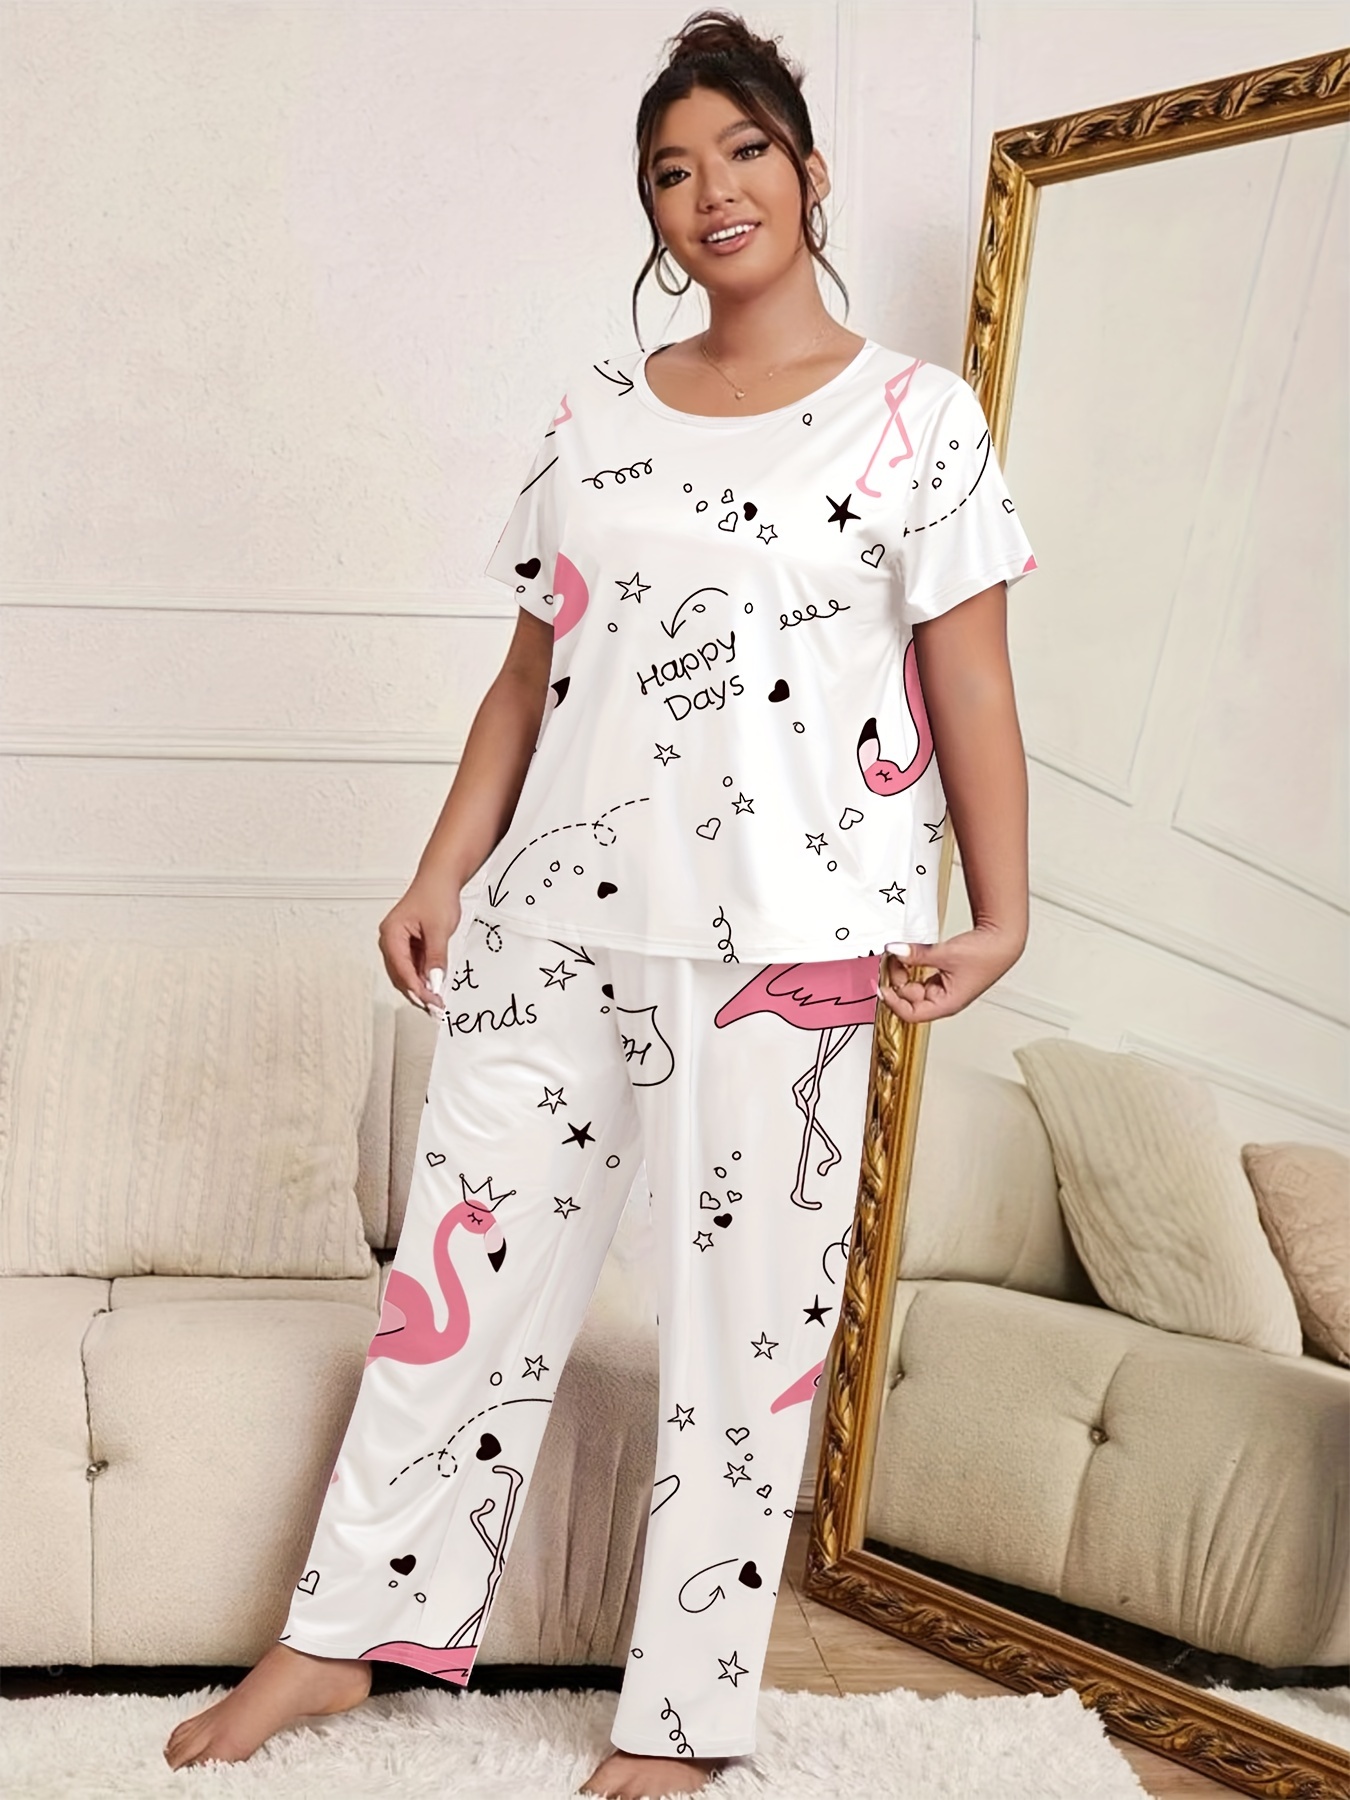 Cute Women's Pajama Sets: How to Choose the Best Pajamas for Women